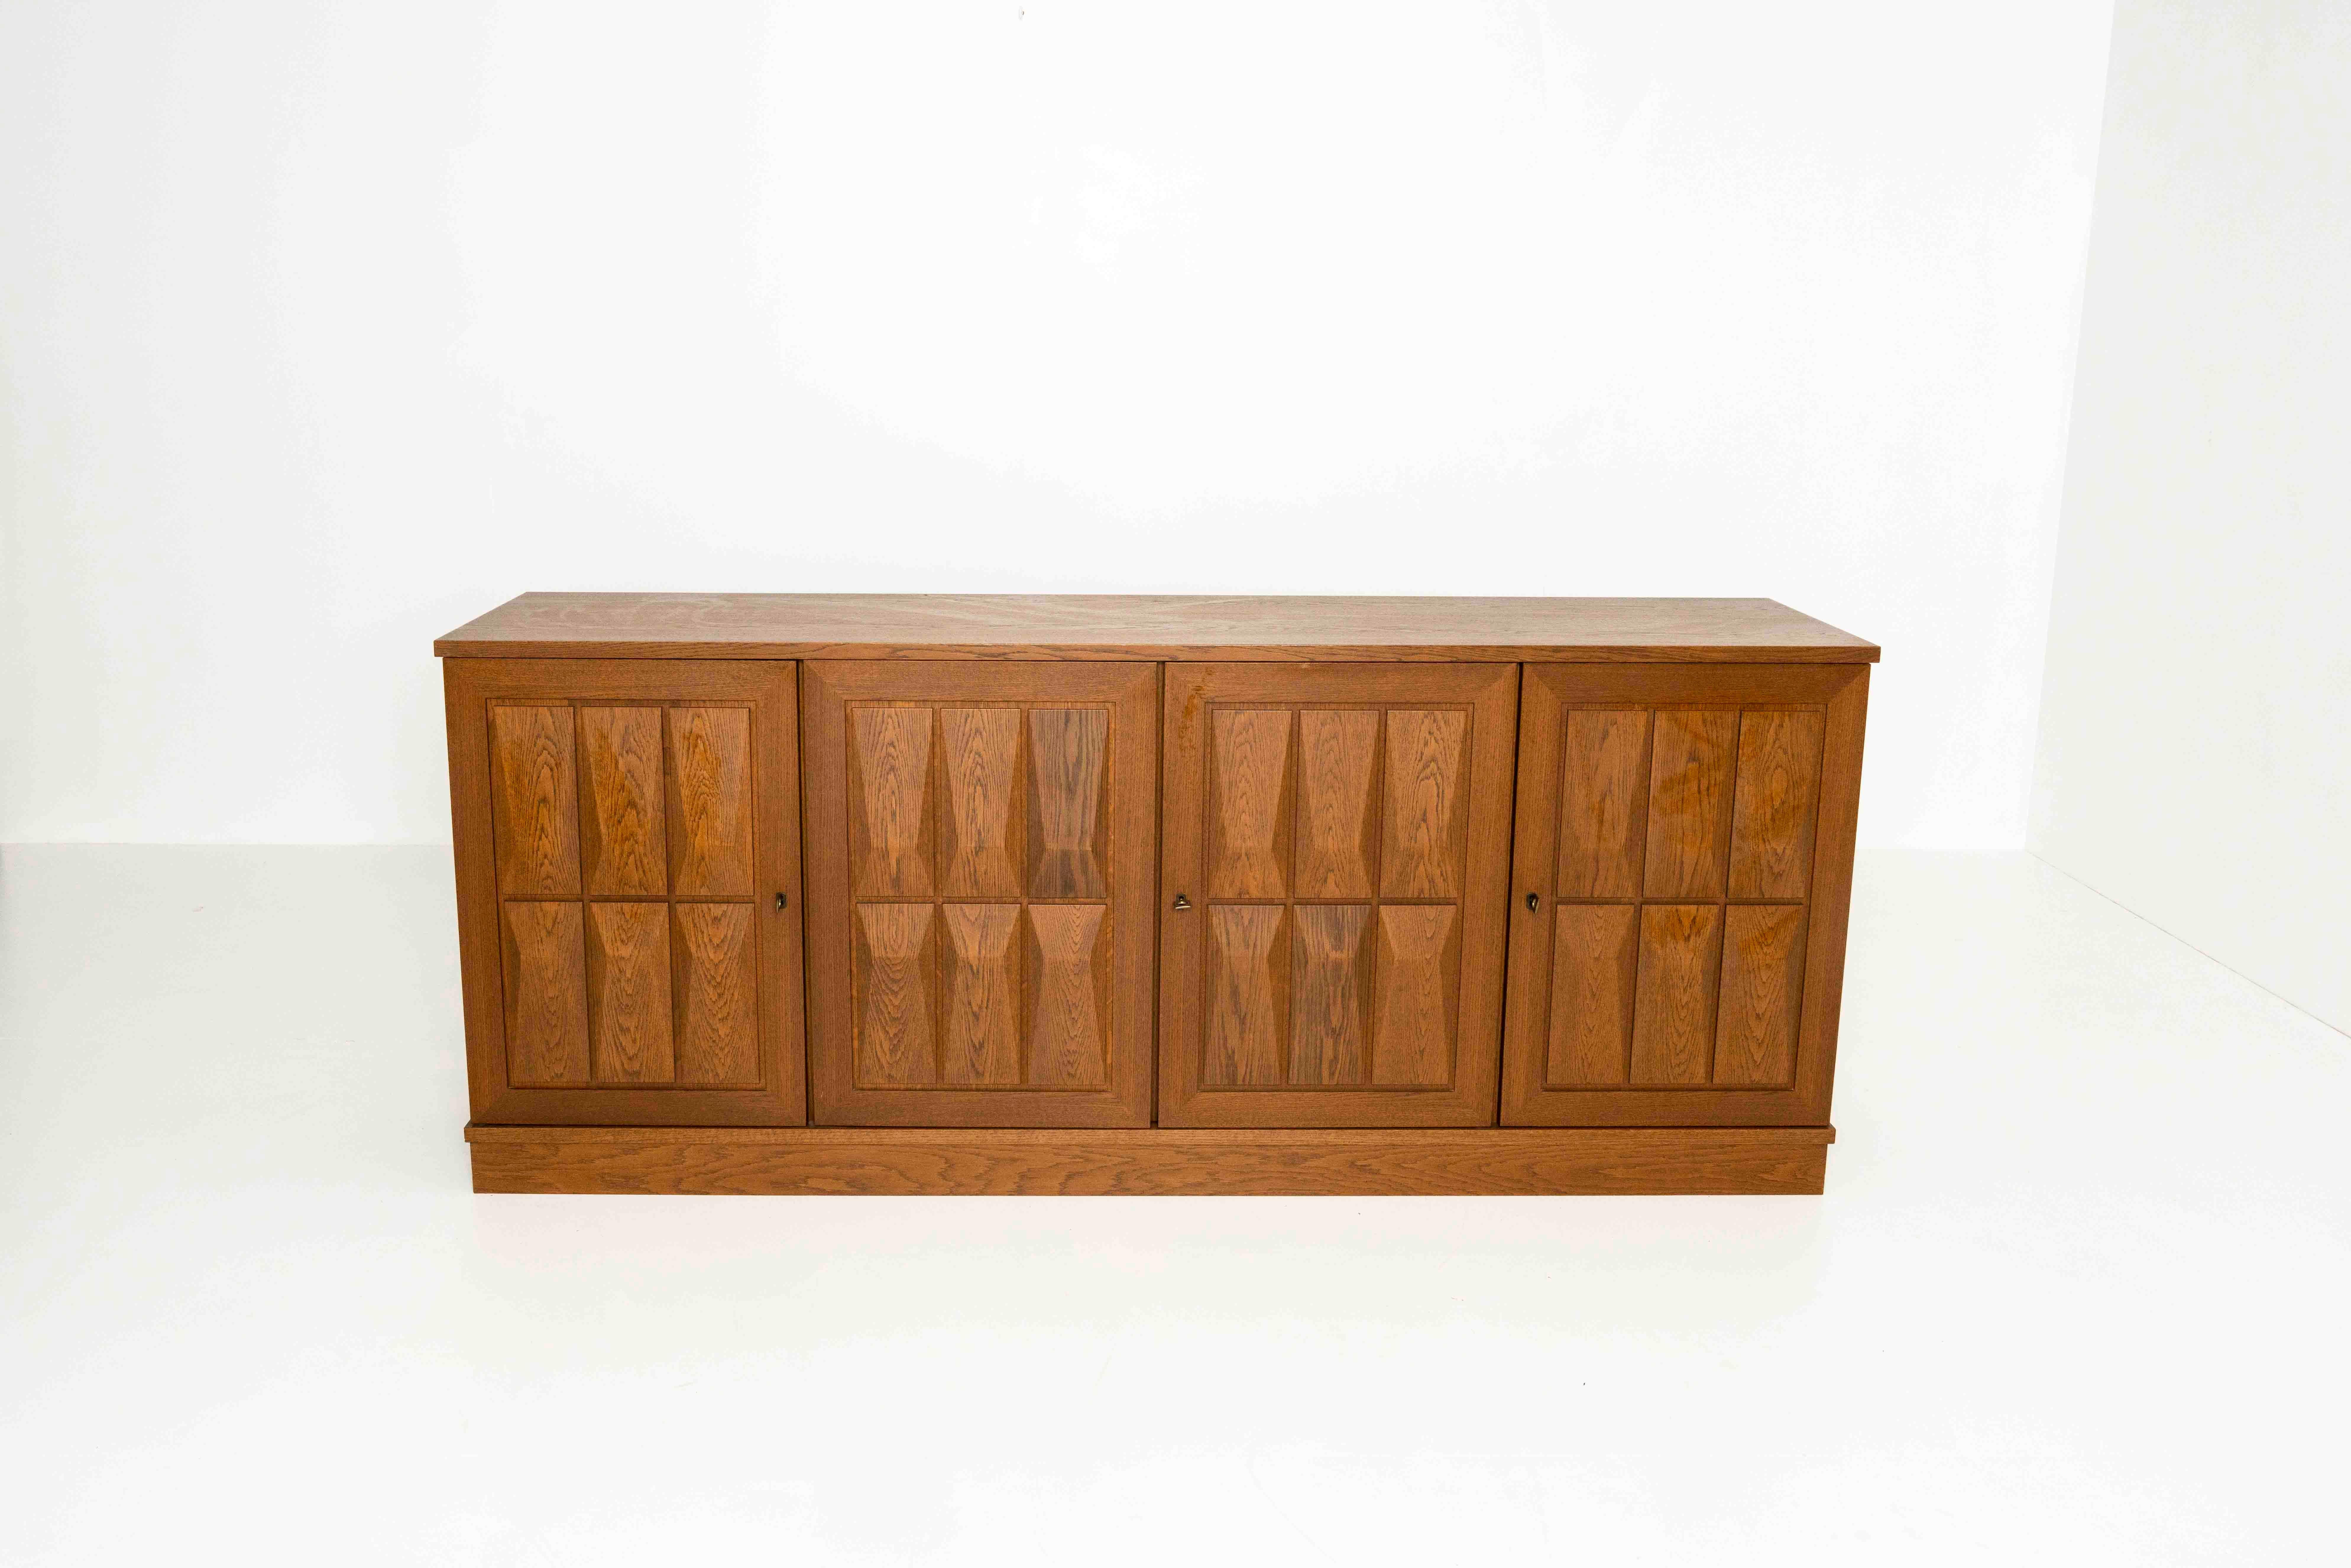 Vintage Oak Brutalist sideboard in the Style of Gerhard Bartels from Germany, ca the 1970s. This sideboard has four panels with 'diamond-shaped' rectangles, hiding several shelves and a drawer. Some shelves are from a later period. There are three